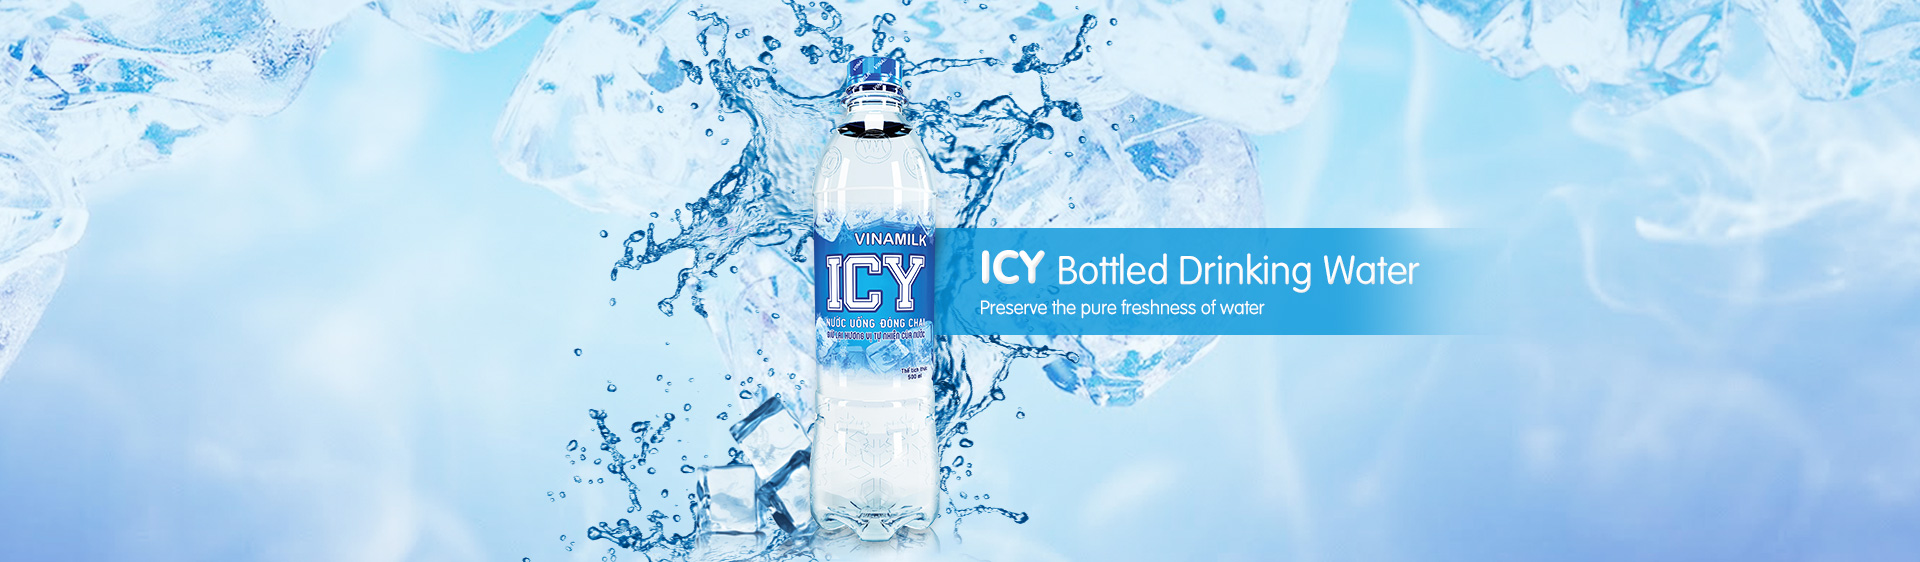 ICY Bottled Drinking Water